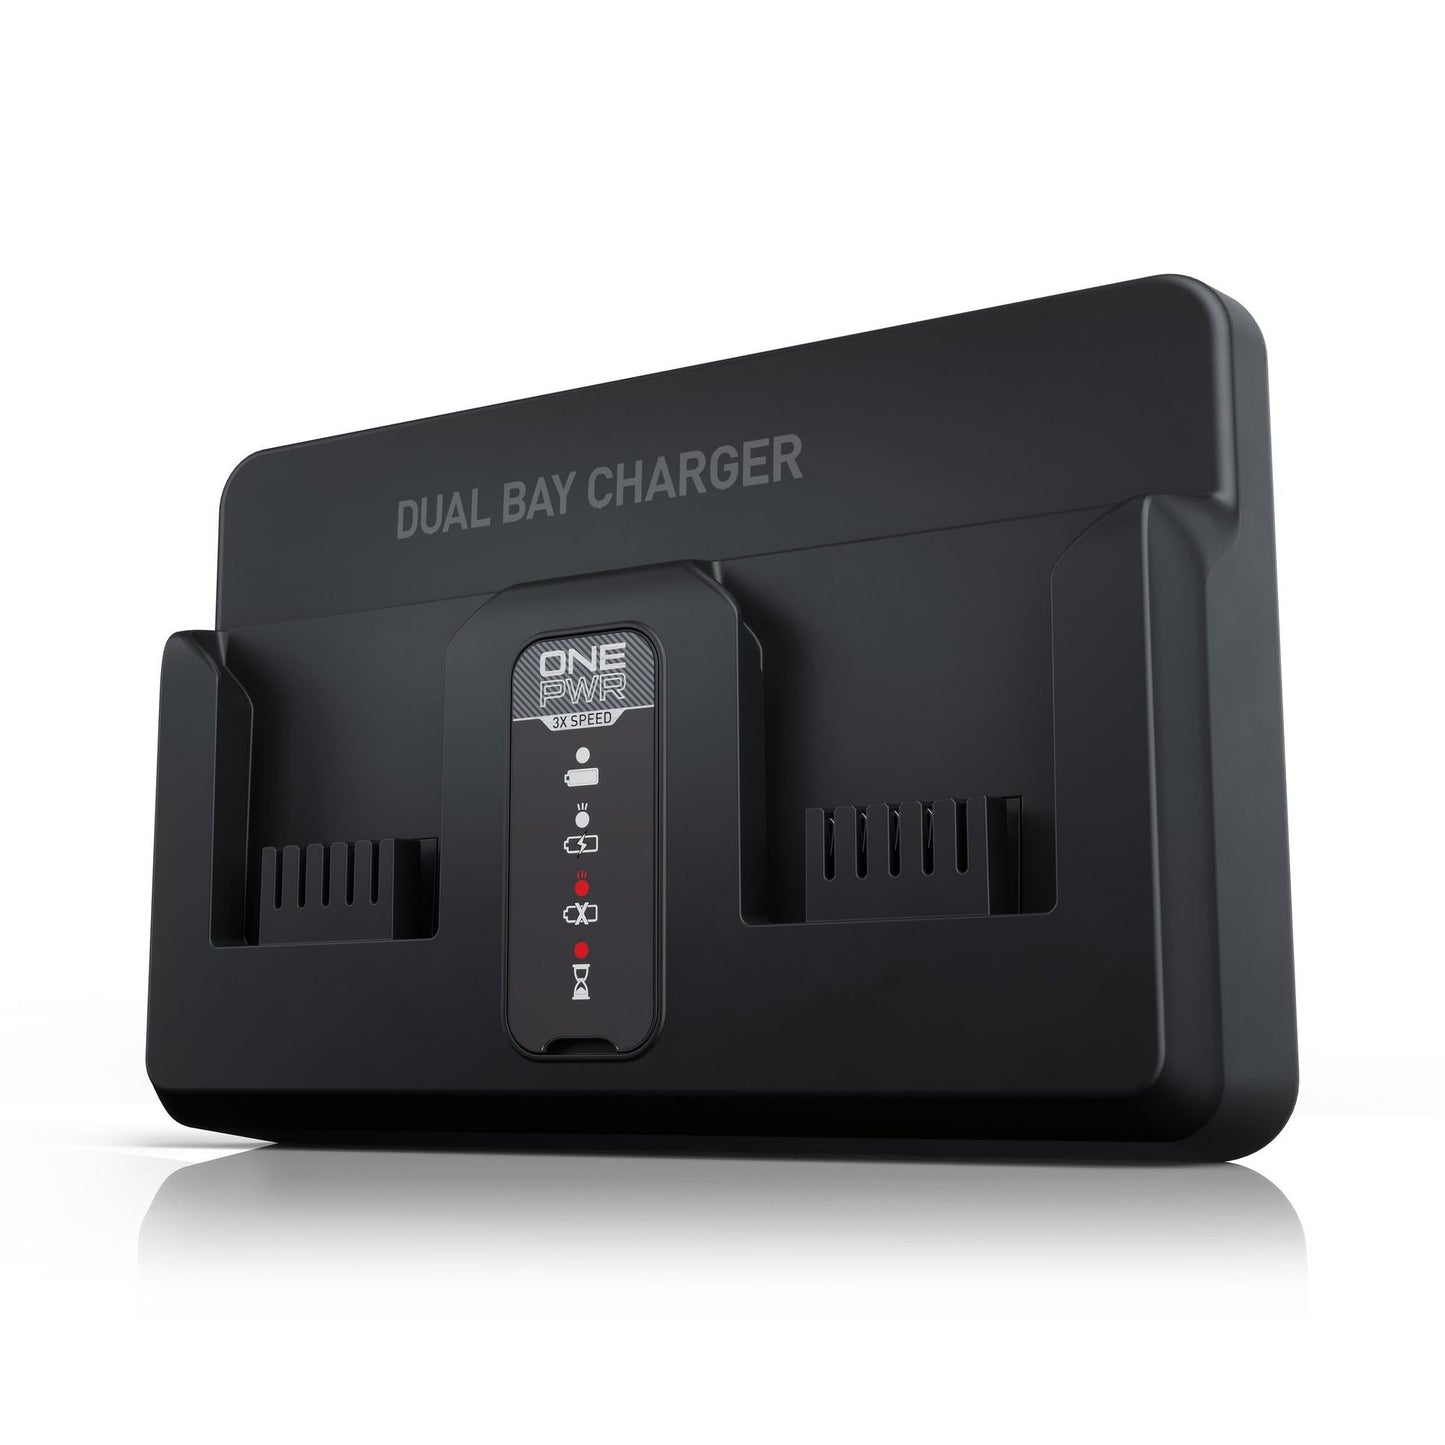 ONEPWR 8Ah Battery (2-Pack) + Dual Bay Battery Charger